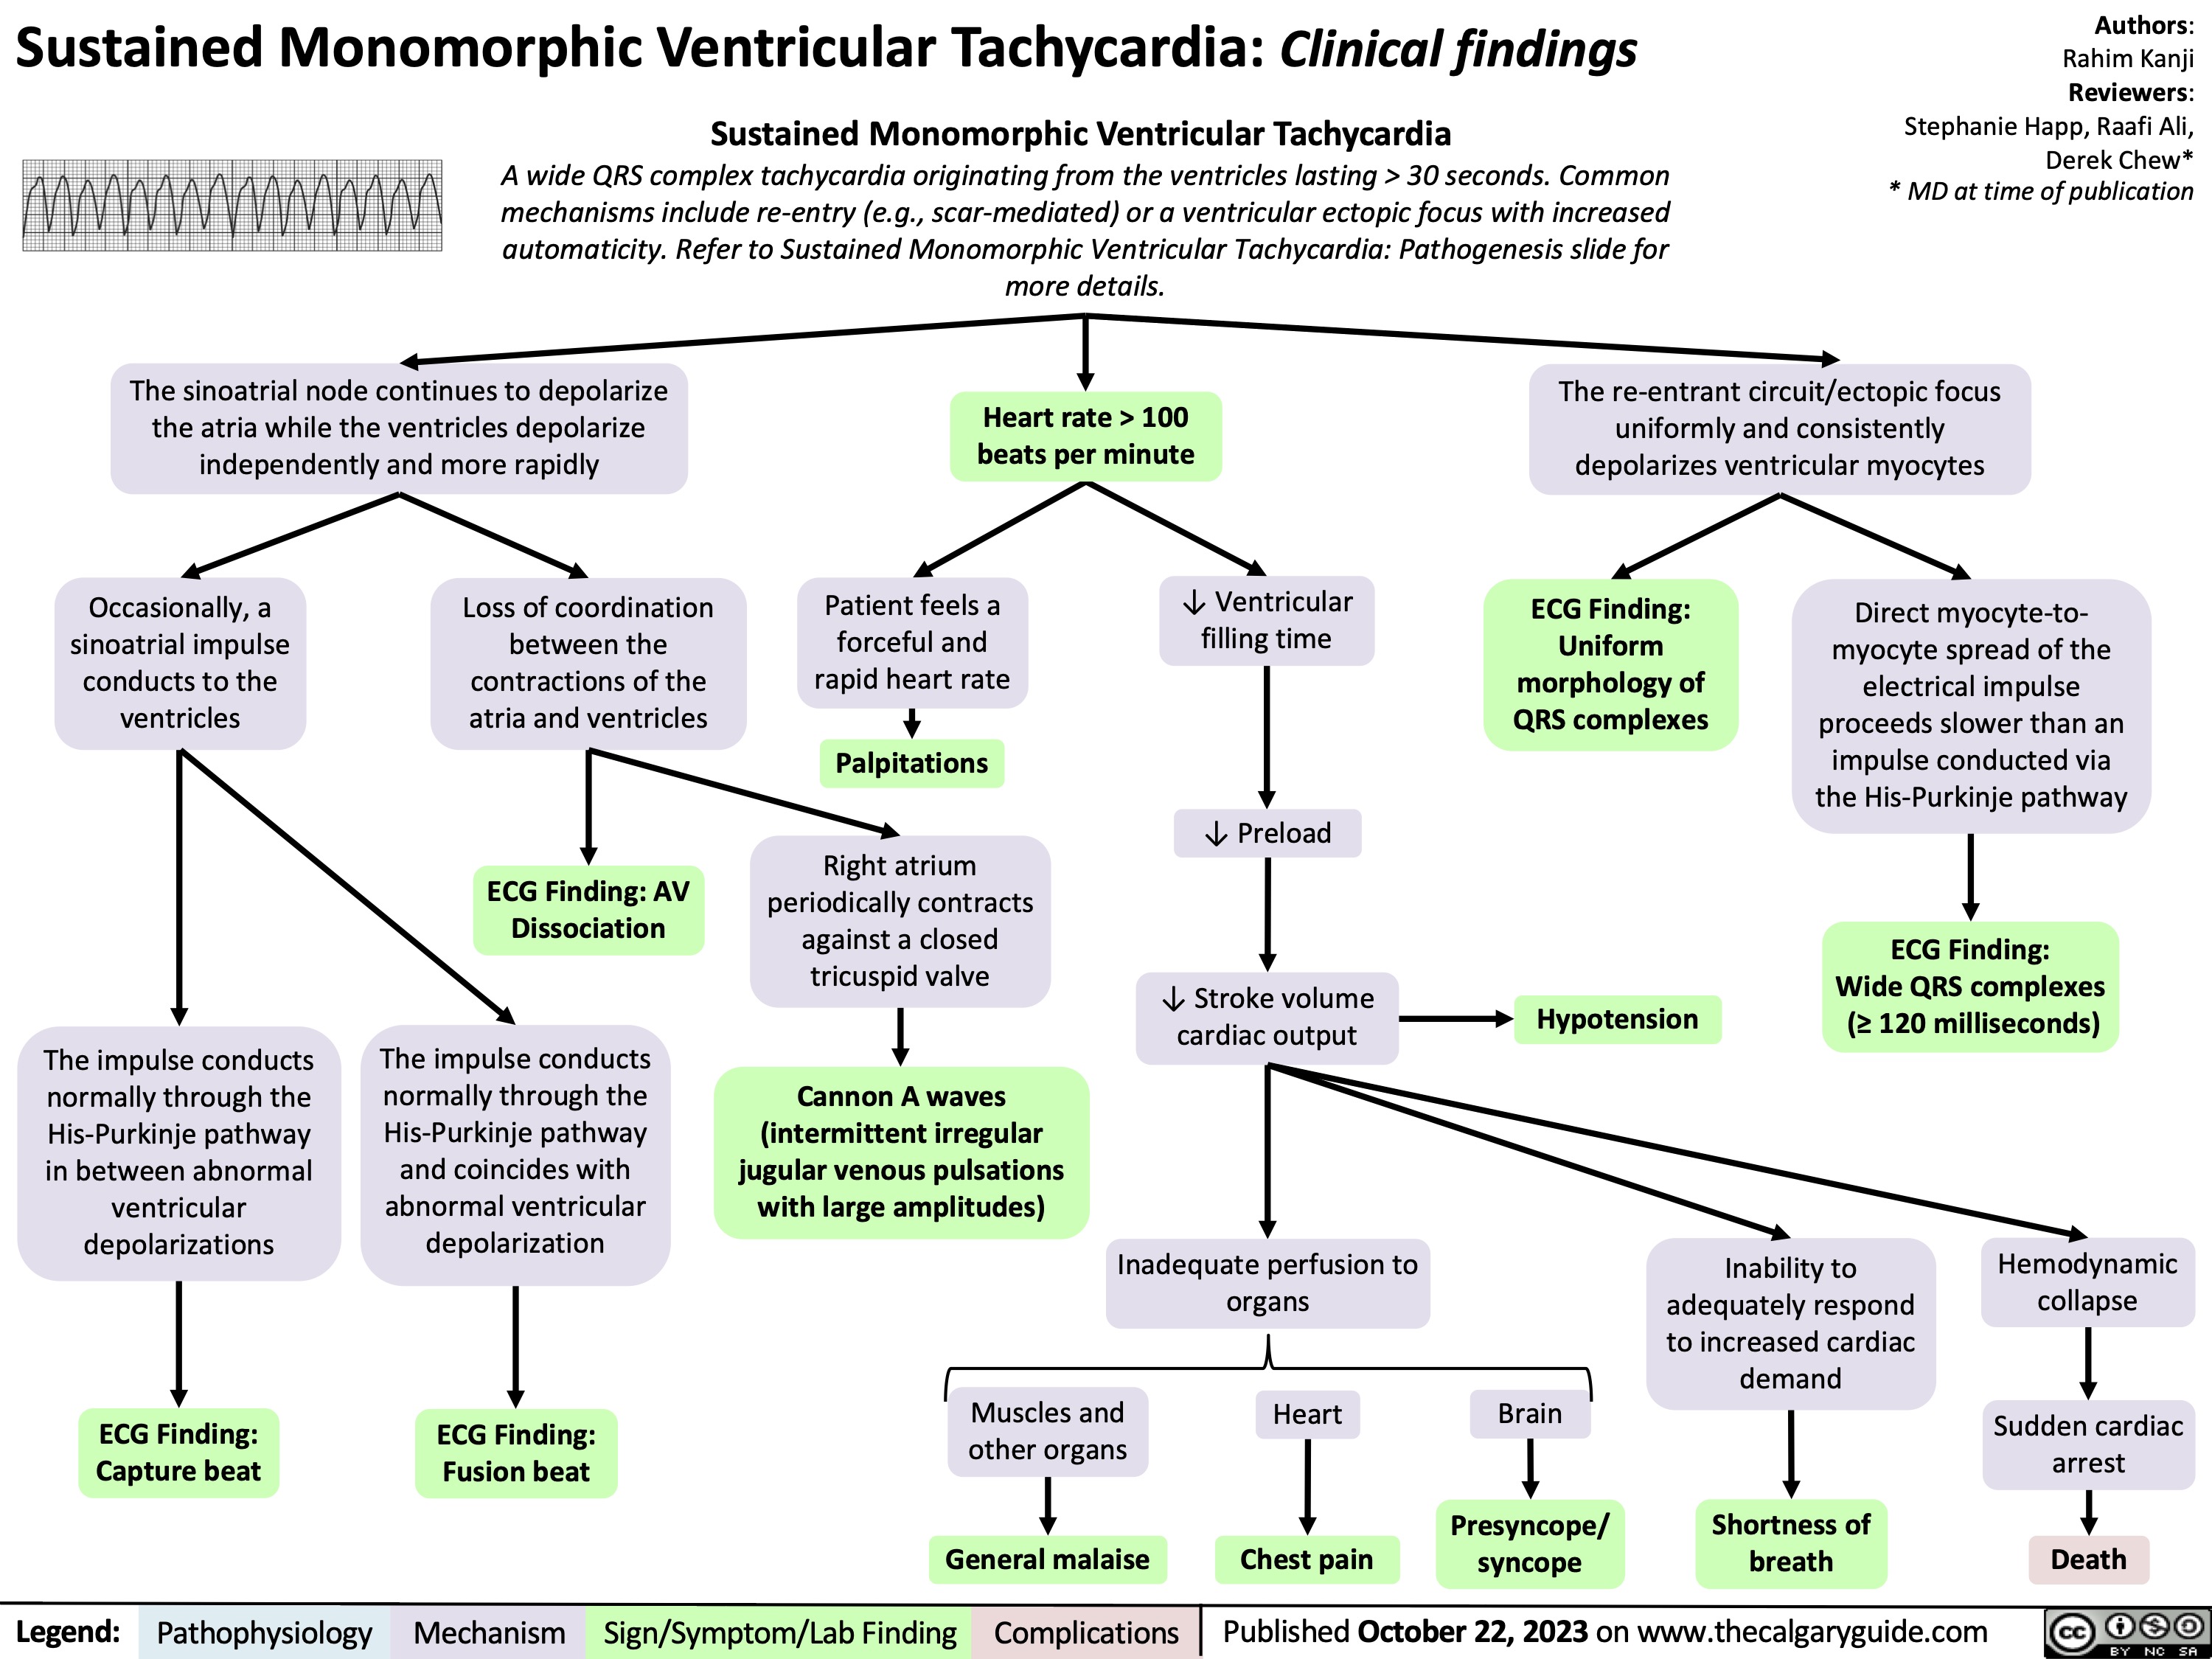 Sustained Monomorphic Ventricular Tachycardia: Clinical findings
Sustained Monomorphic Ventricular Tachycardia
A wide QRS complex tachycardia originating from the ventricles lasting > 30 seconds. Common mechanisms include re-entry (e.g., scar-mediated) or a ventricular ectopic focus with increased automaticity. Refer to Sustained Monomorphic Ventricular Tachycardia: Pathogenesis slide for more details.
Authors: Rahim Kanji Reviewers: Stephanie Happ, Raafi Ali, Derek Chew* * MD at time of publication
     The sinoatrial node continues to depolarize the atria while the ventricles depolarize independently and more rapidly
Heart rate > 100 beats per minute
The re-entrant circuit/ectopic focus uniformly and consistently depolarizes ventricular myocytes
           Occasionally, a sinoatrial impulse conducts to the ventricles
Loss of coordination between the contractions of the atria and ventricles
ECG Finding: AV Dissociation
The impulse conducts normally through the His-Purkinje pathway and coincides with abnormal ventricular depolarization
ECG Finding: Fusion beat
Patient feels a forceful and rapid heart rate
Palpitations
Right atrium periodically contracts against a closed tricuspid valve
Cannon A waves (intermittent irregular jugular venous pulsations with large amplitudes)
↓ Ventricular filling time
↓ Preload
↓ Stroke volume cardiac output
Inadequate perfusion to organs
ECG Finding: Uniform morphology of QRS complexes
Direct myocyte-to- myocyte spread of the electrical impulse proceeds slower than an impulse conducted via the His-Purkinje pathway
ECG Finding: Wide QRS complexes (≥ 120 milliseconds)
             The impulse conducts normally through the His-Purkinje pathway in between abnormal ventricular depolarizations
ECG Finding: Capture beat
Muscles and other organs
General malaise
Heart
Chest pain
Brain
Presyncope/ syncope
Inability to adequately respond to increased cardiac demand
Shortness of breath
Hemodynamic collapse
Sudden cardiac arrest
Death
Hypotension
                         Legend:
 Pathophysiology
Mechanism
Sign/Symptom/Lab Finding
 Complications
 Published October 22, 2023 on www.thecalgaryguide.com
   